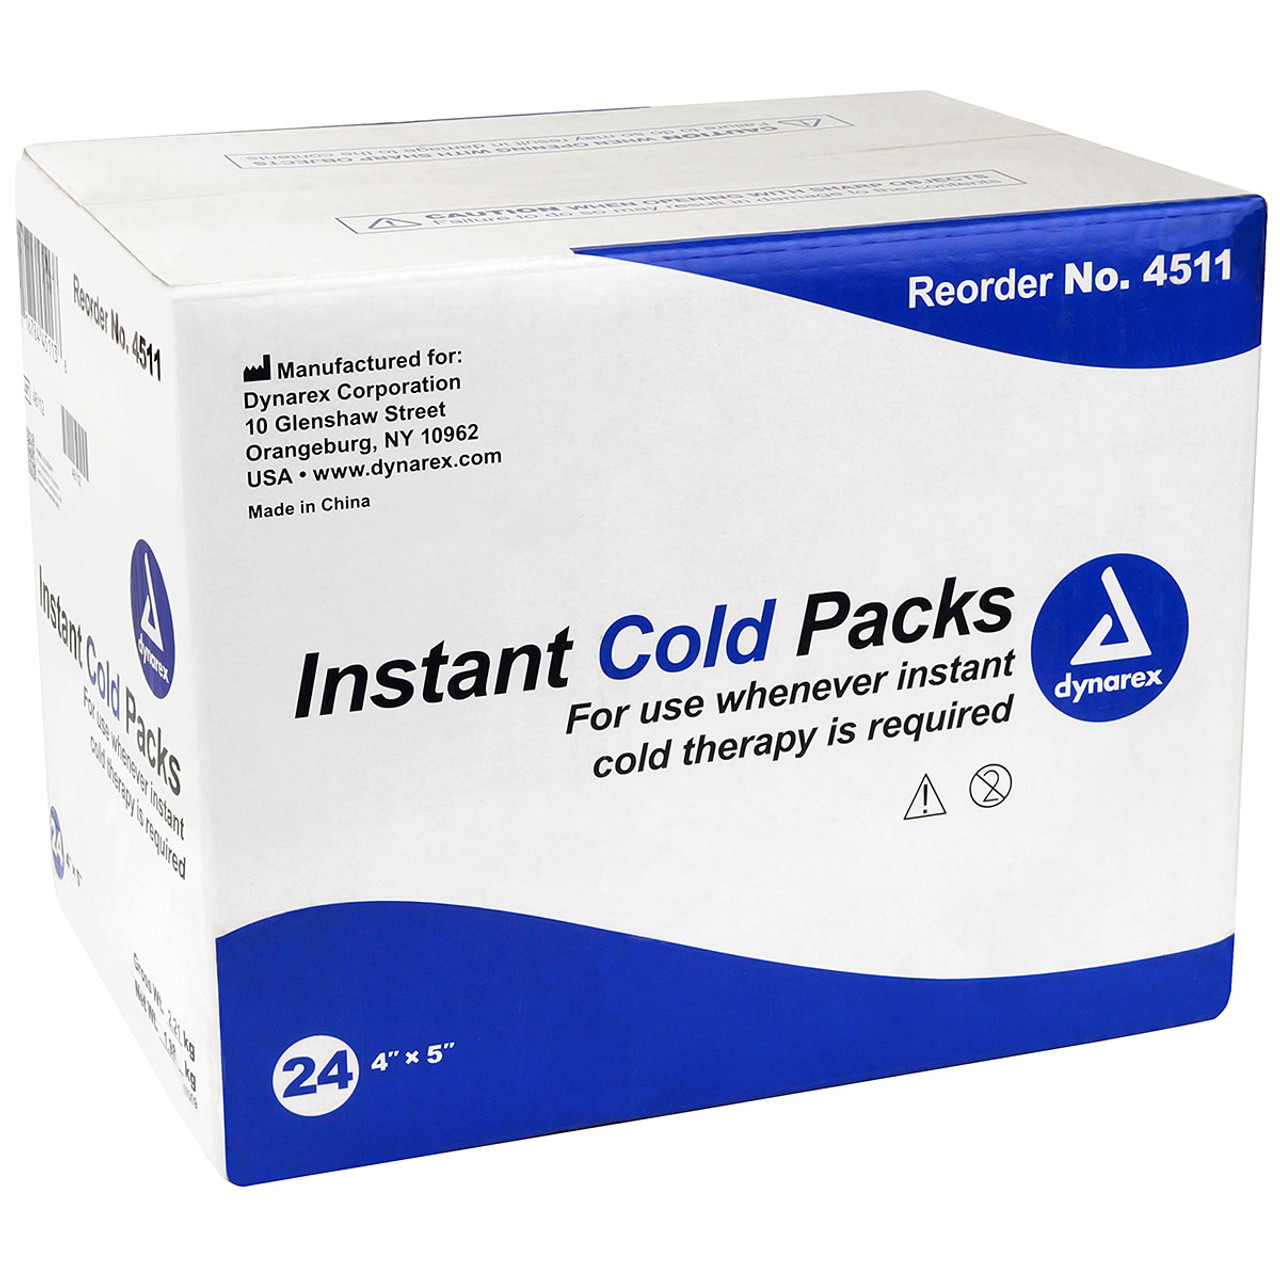 COL-PRESS Instant Cold Pack Ice Pack Disposable Single Use Ice Cold  Compression Therapy for Pain Relief from Swelling Direct Skin Contact 8